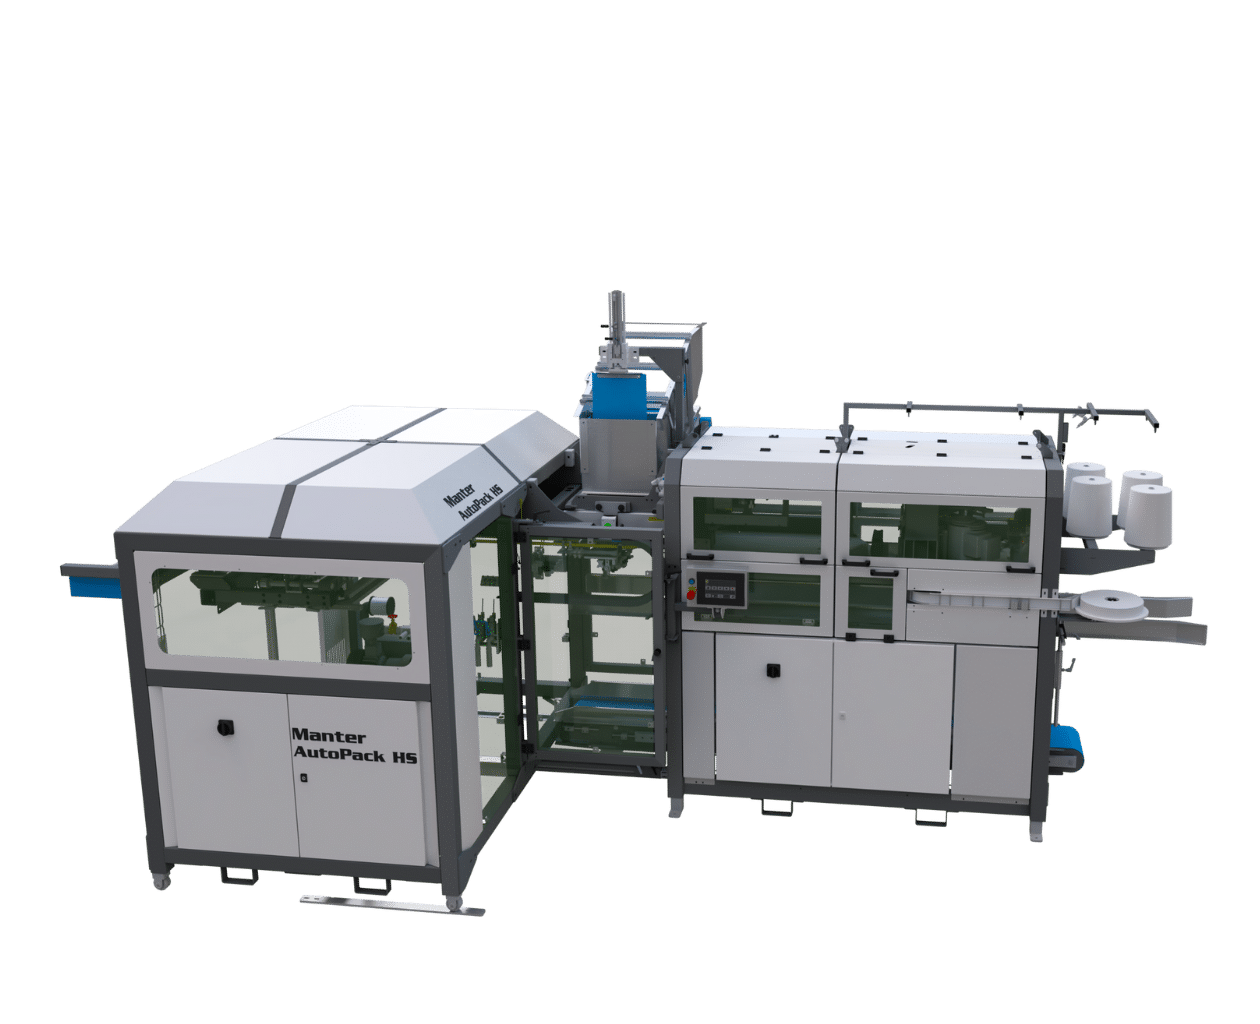 AutoPack HS - Packaging machine for burlap, net and paper bags​